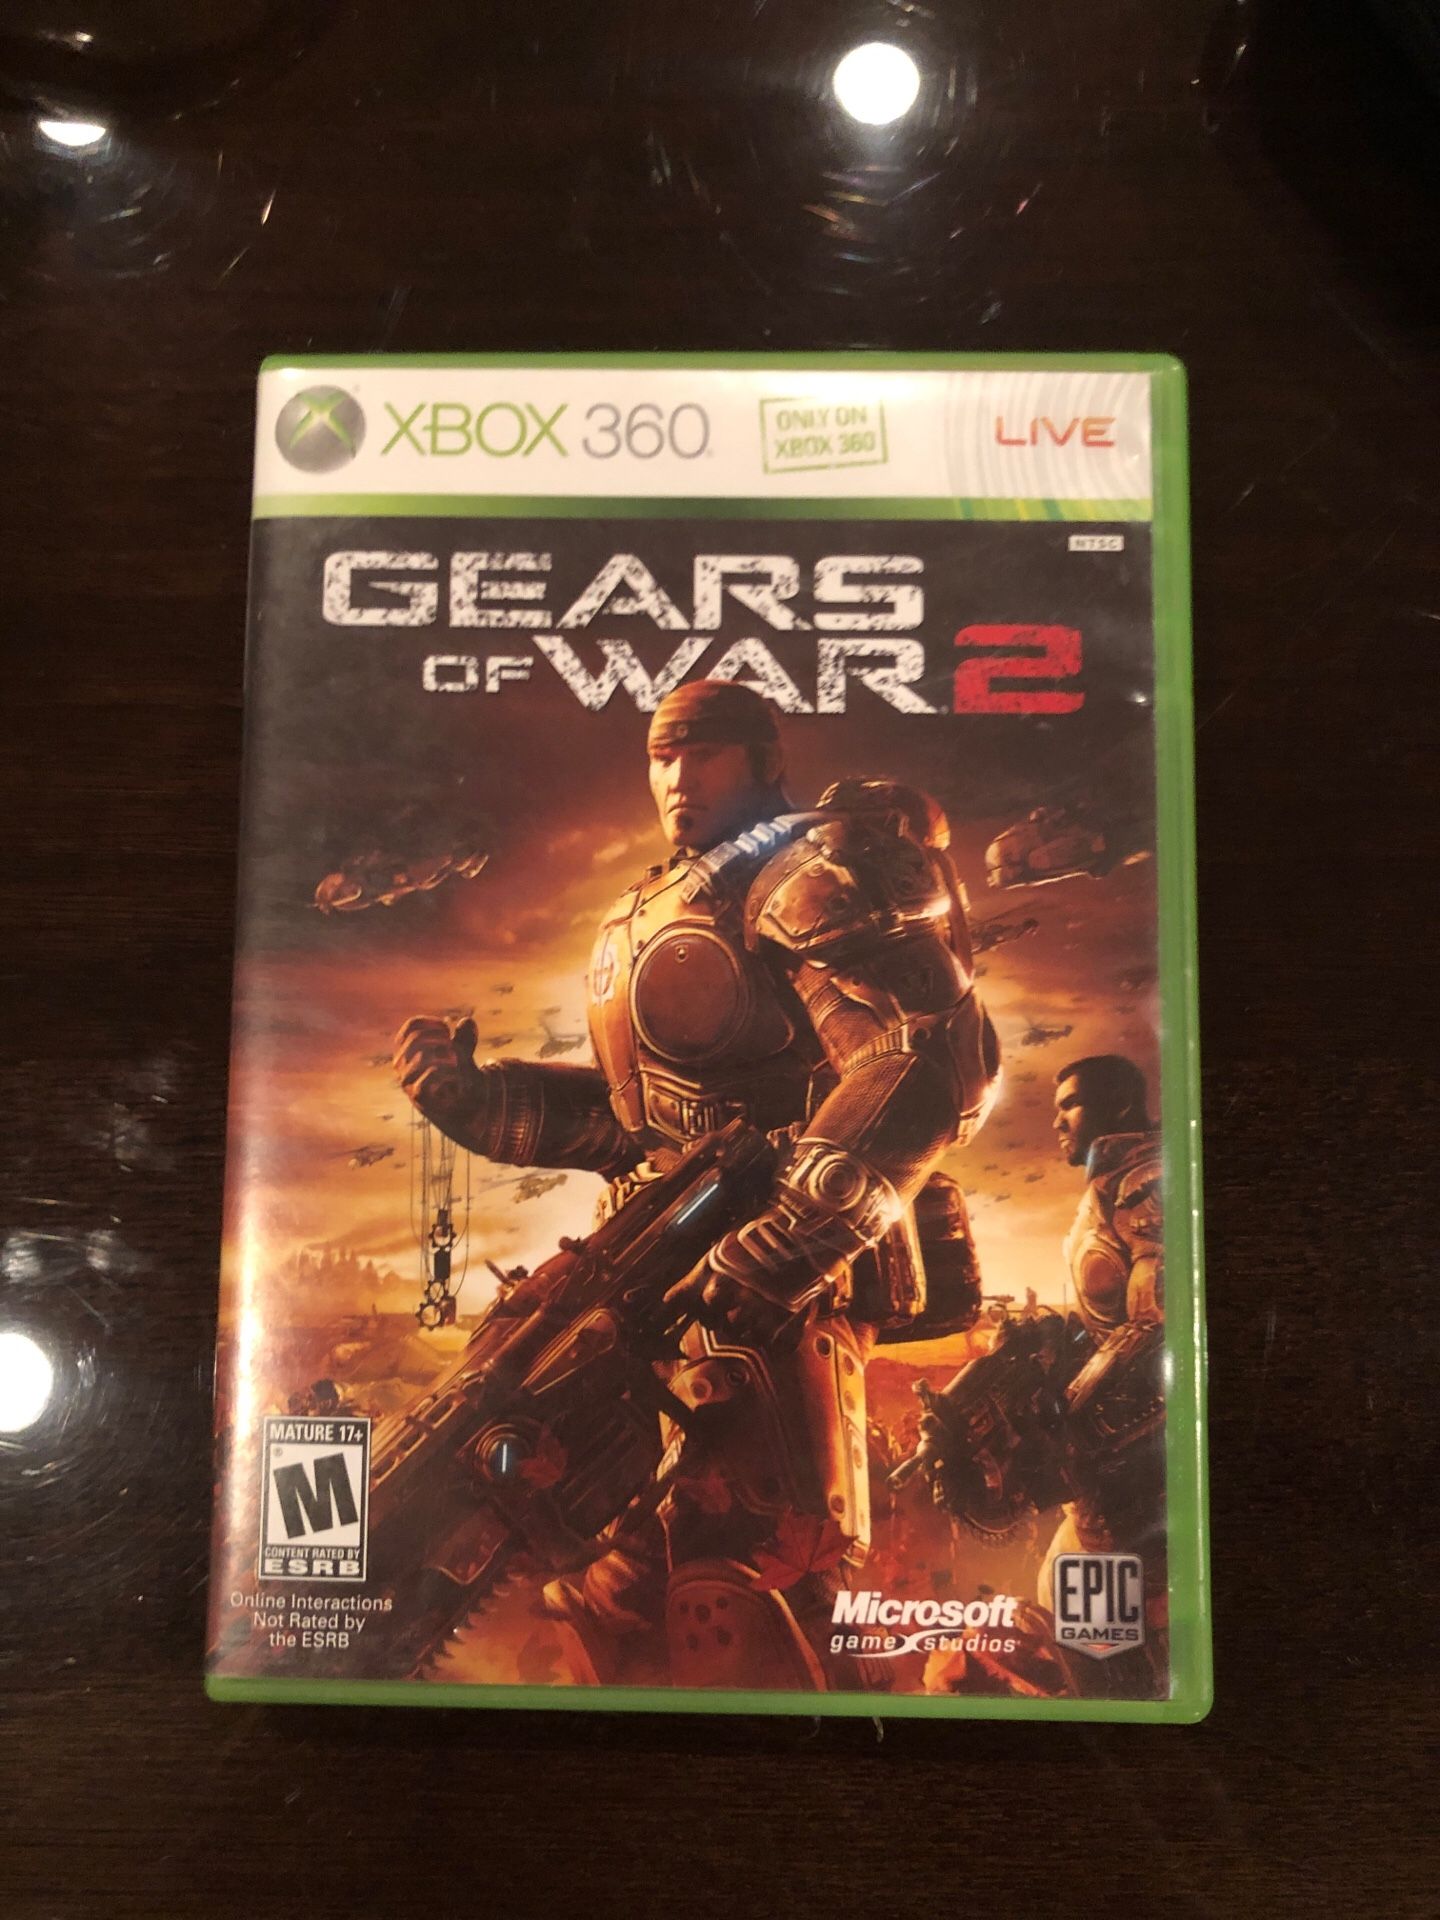 Gears of war 2 Xbox 360 game